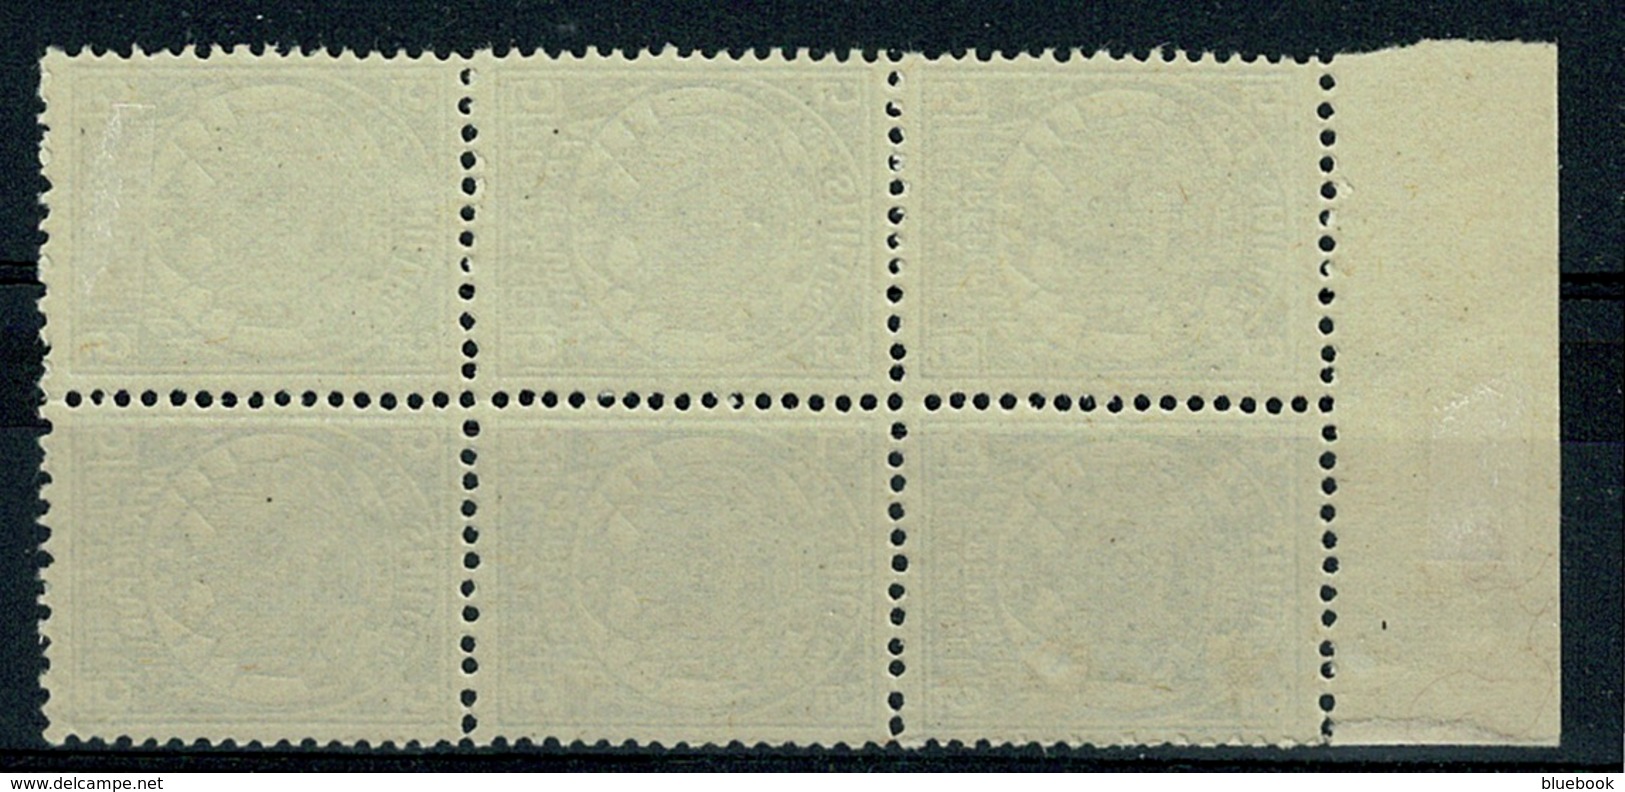 Ref 1233 - 1895 / 1896 - South Africa Transvaal Stamps